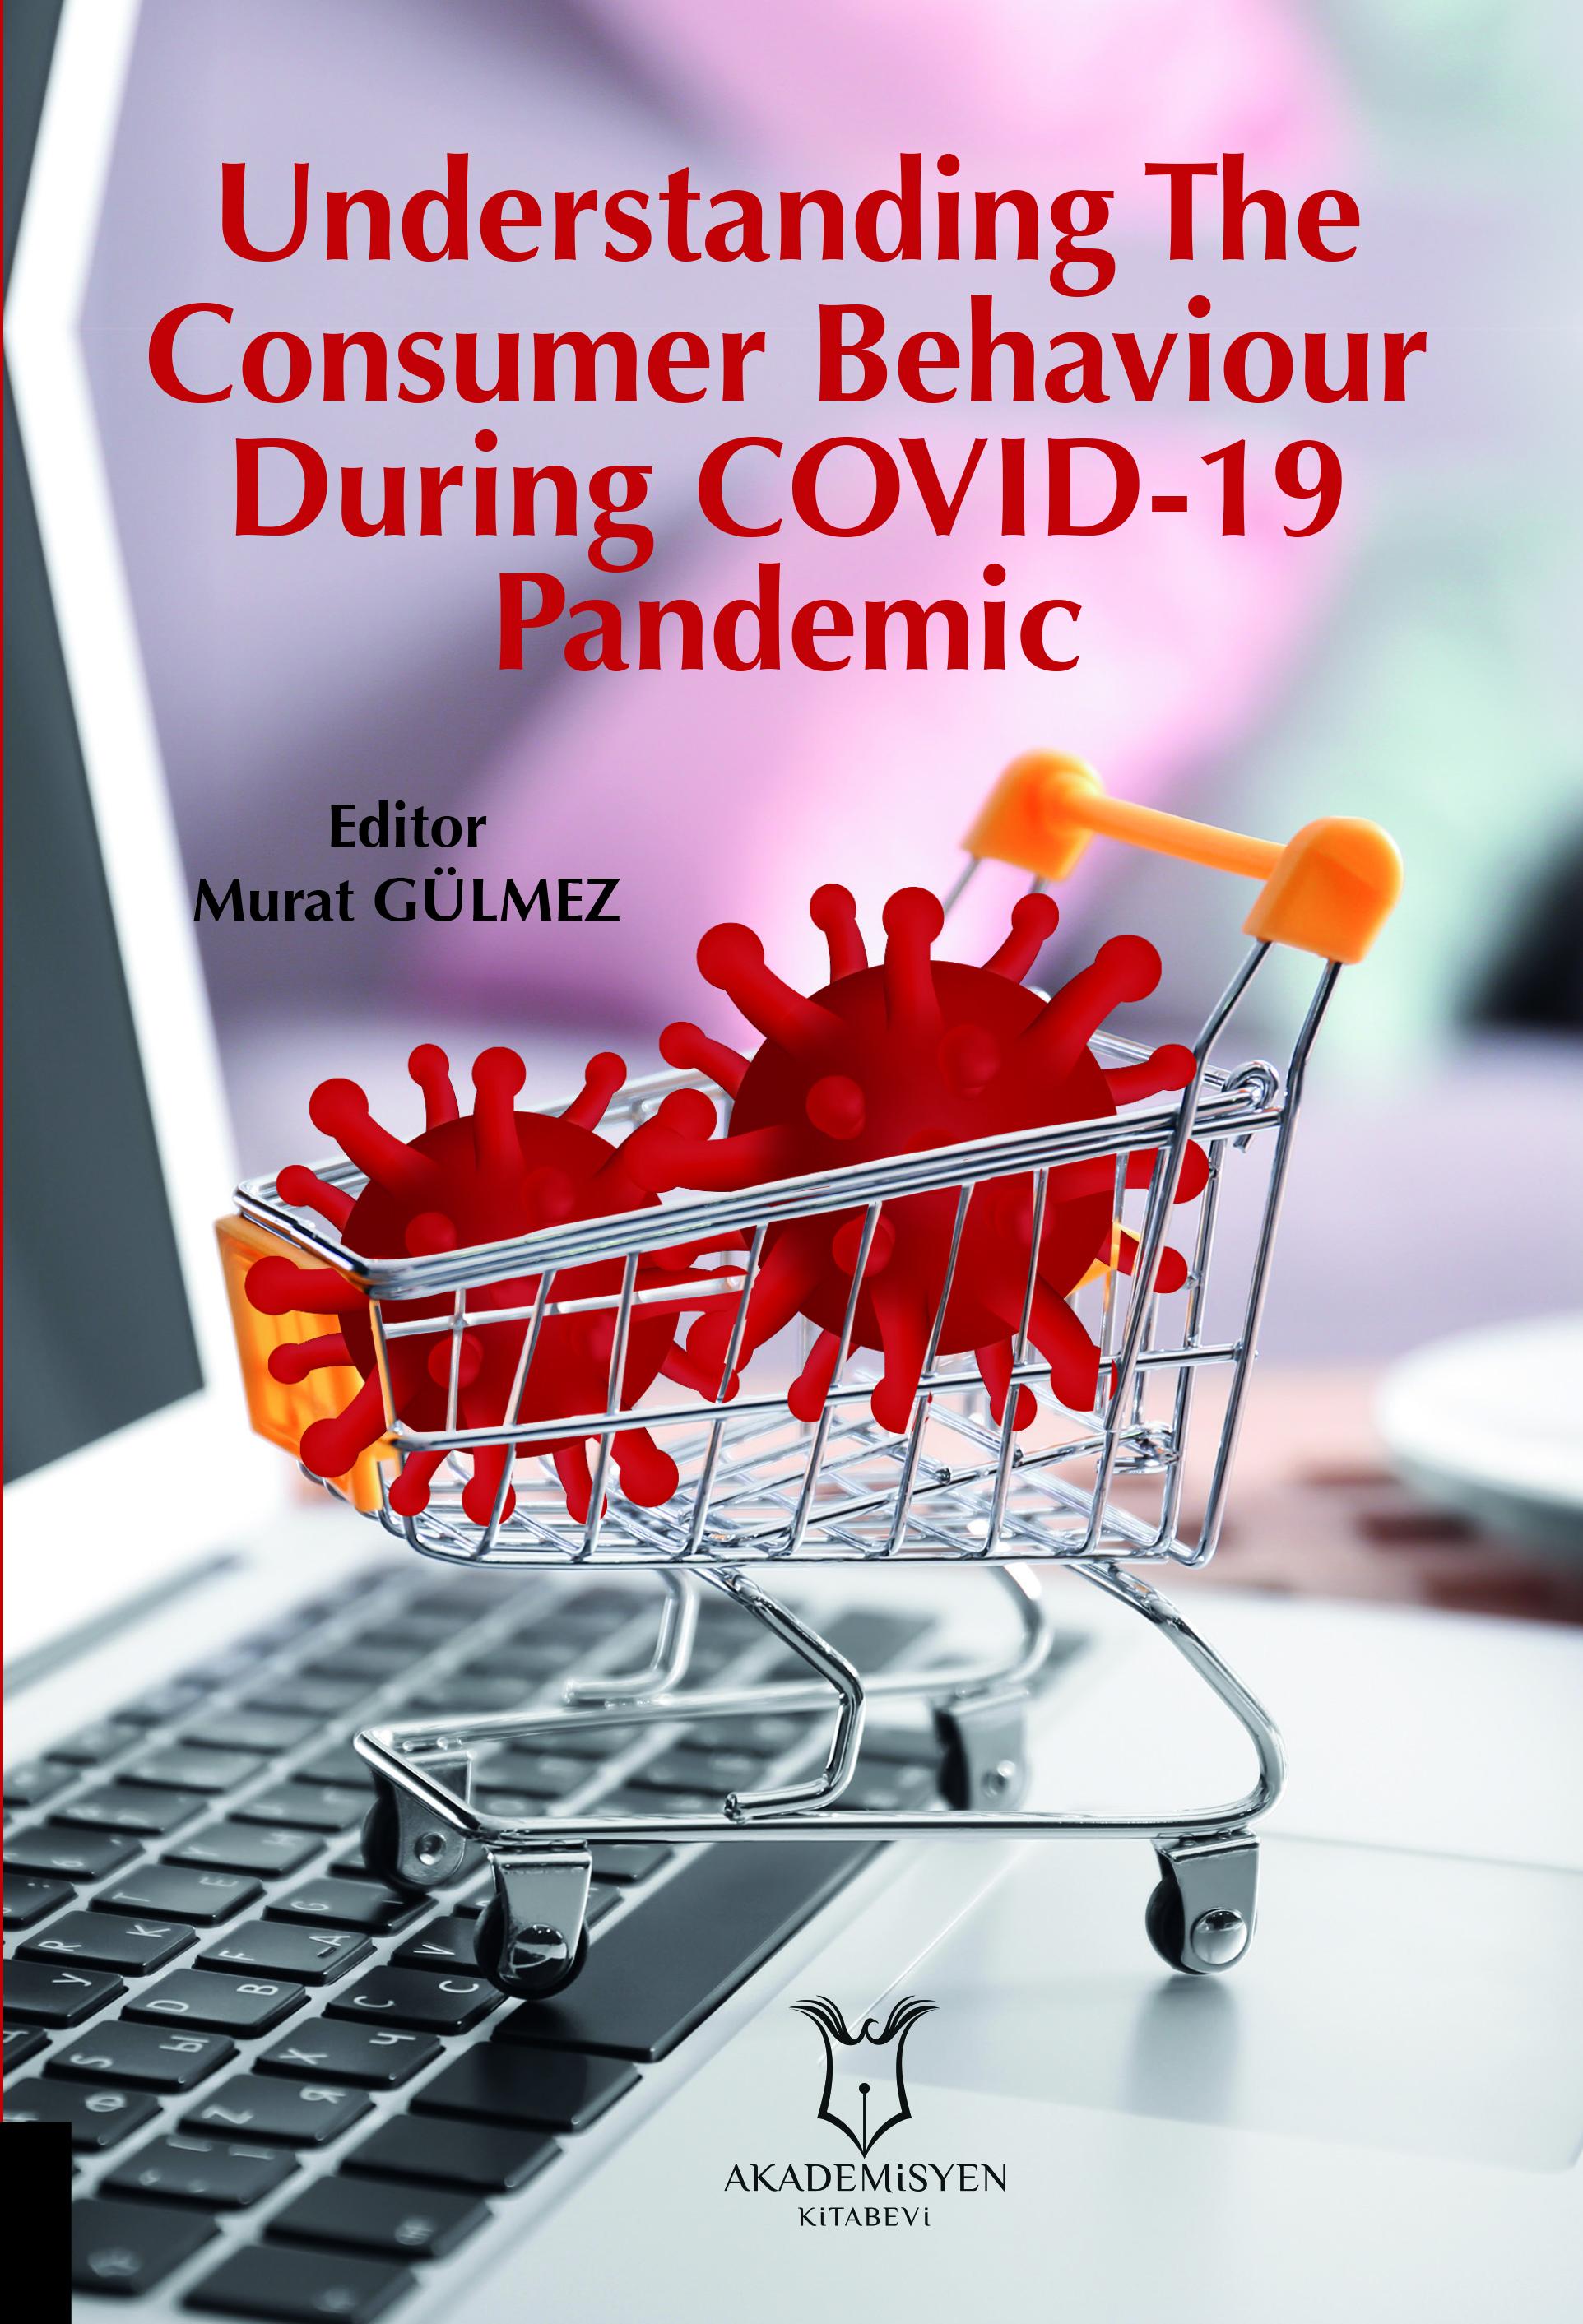 Understanding The Consumer Behaviour During COVID-19 Pandemic